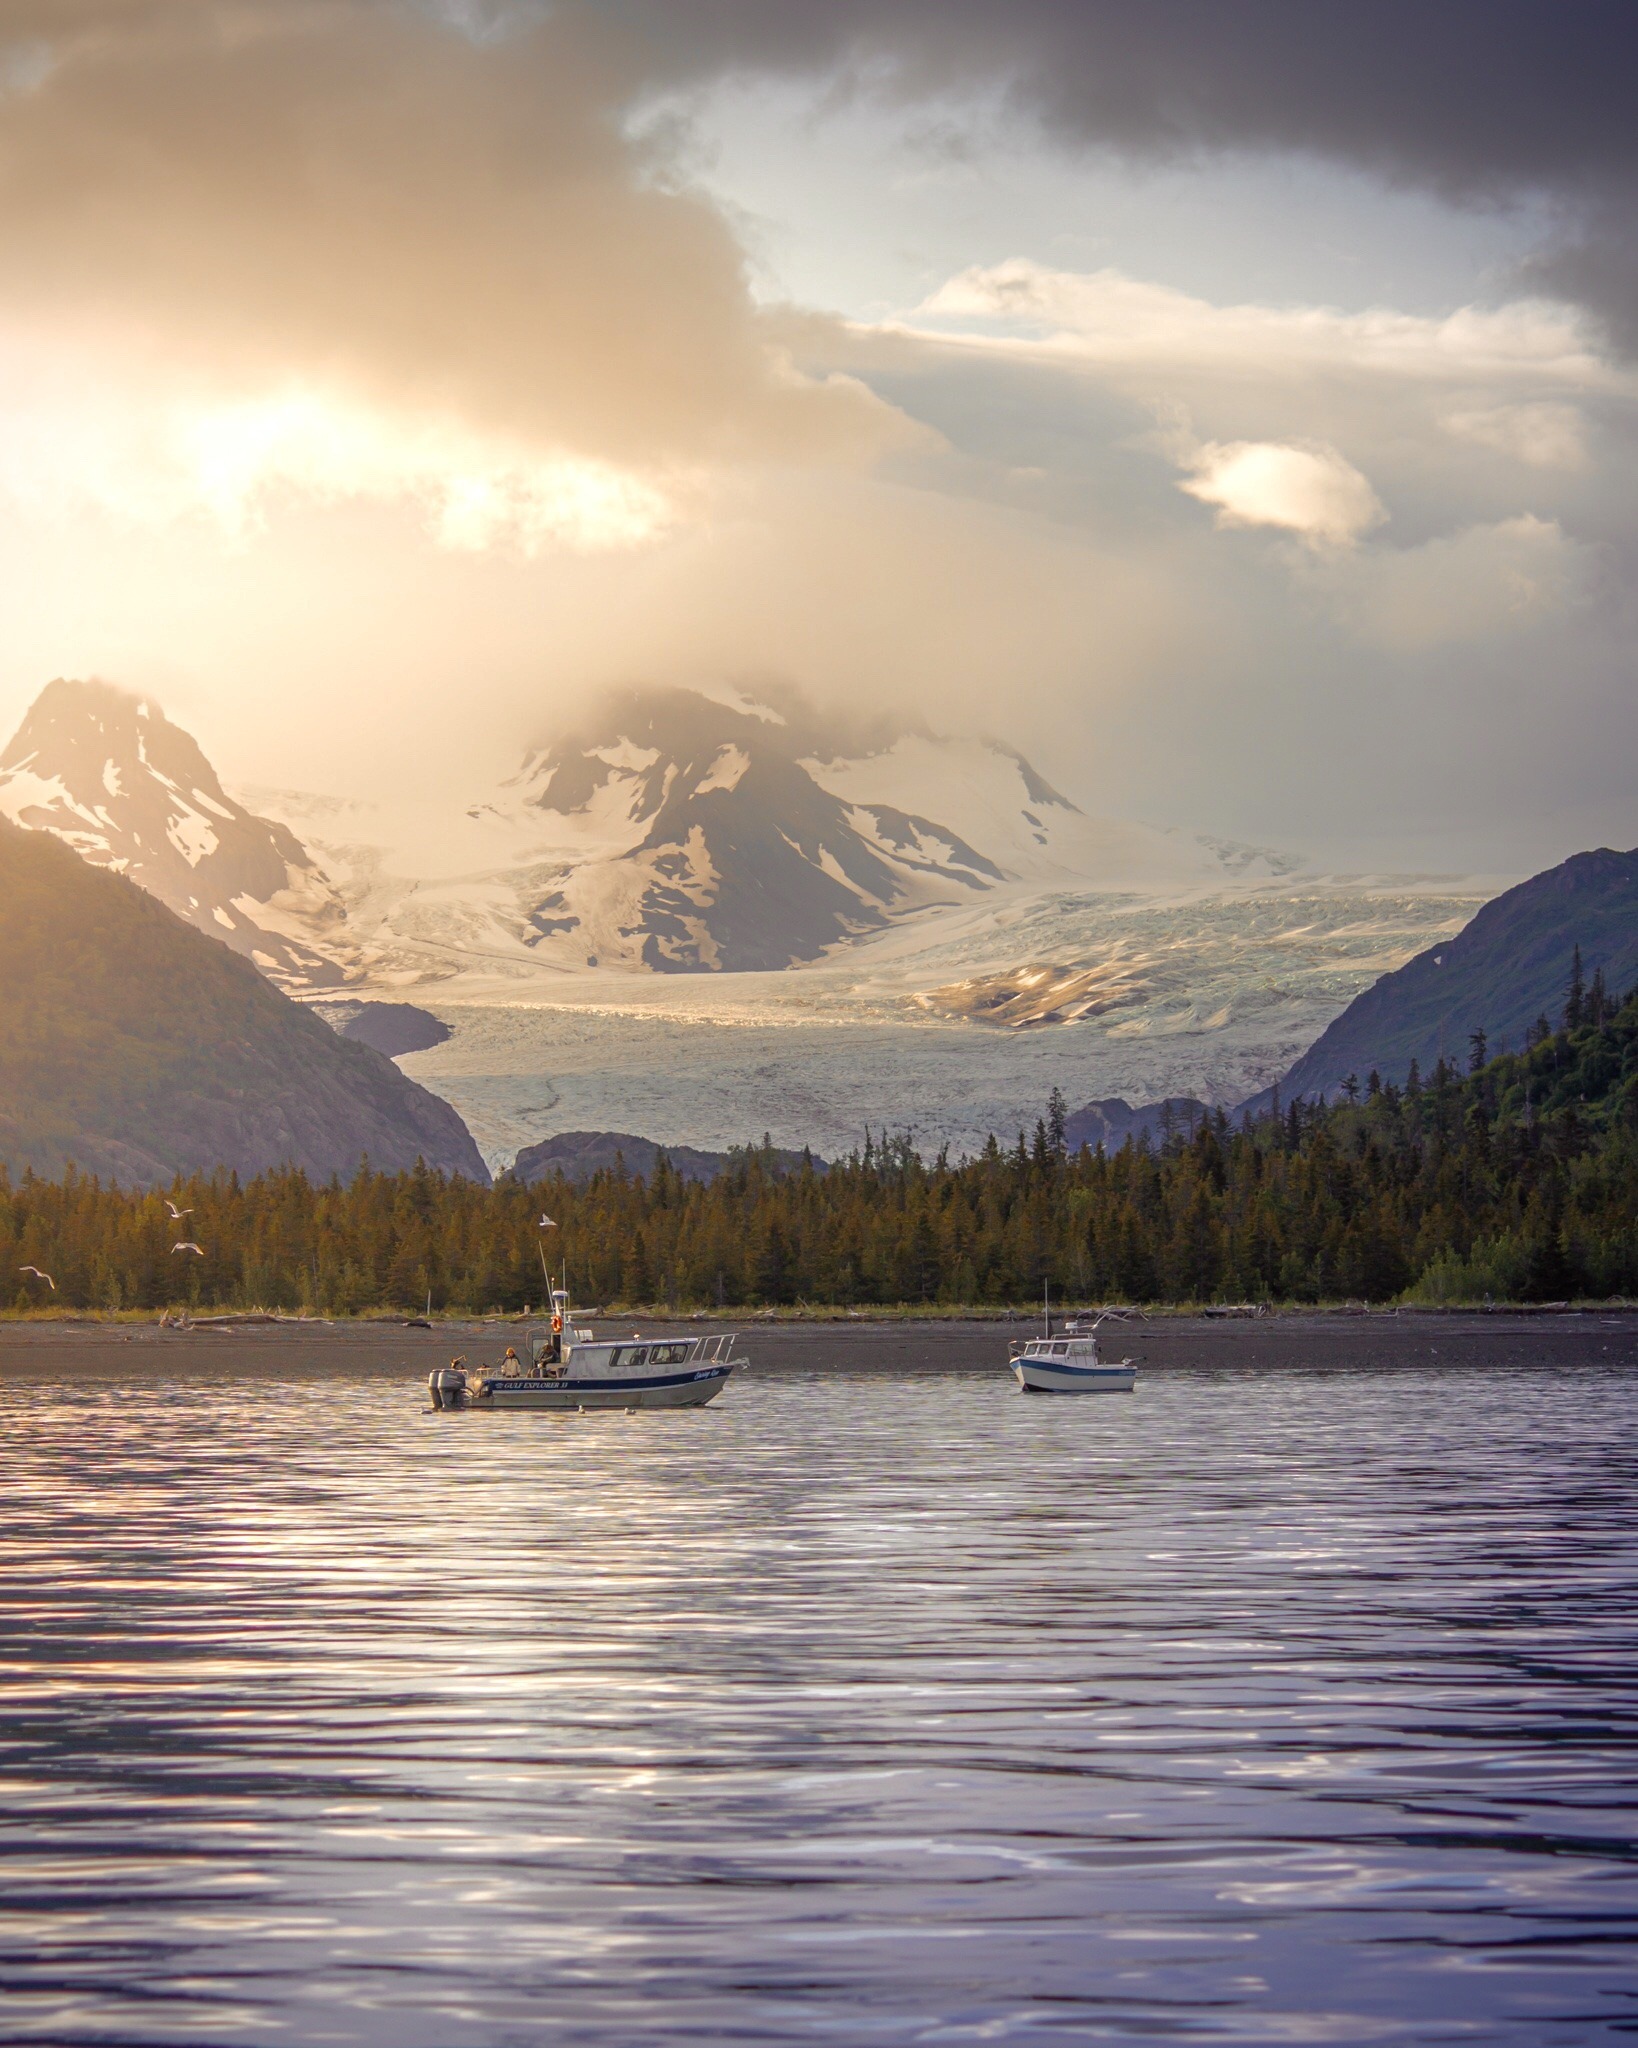 Fishing boats on water, sun shining through clouds, glacier descending from mountains